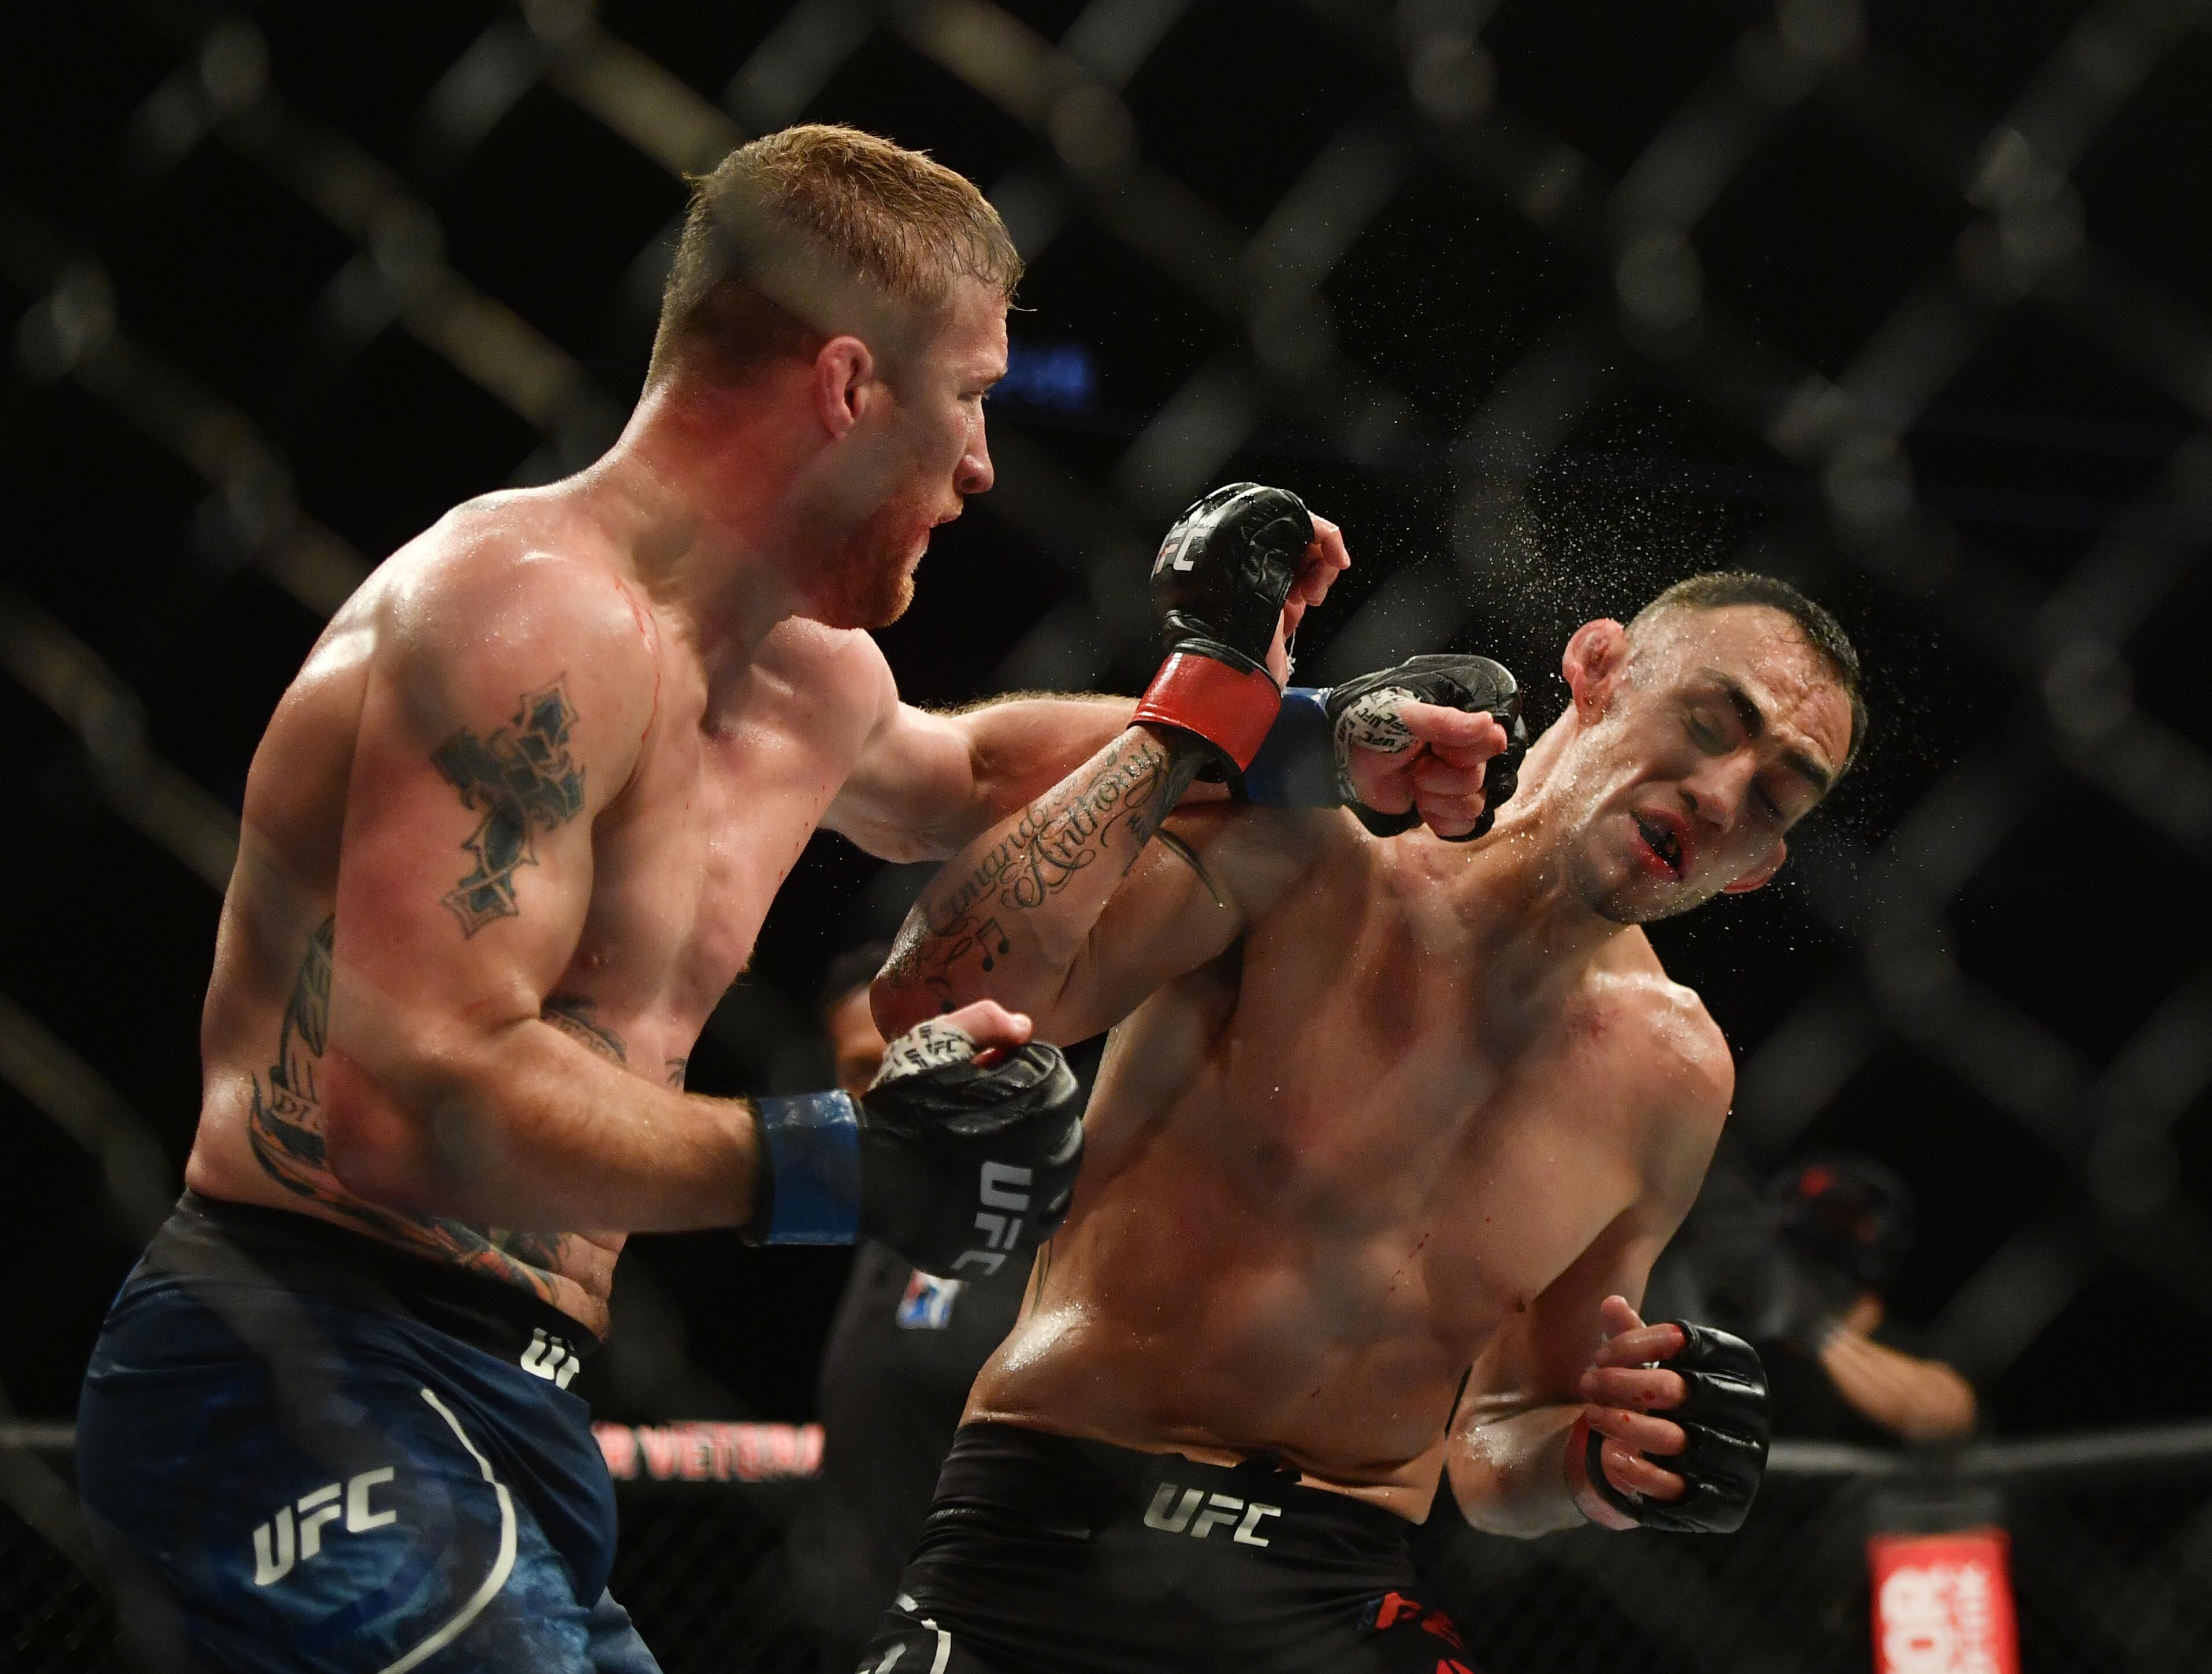 Tony Ferguson gets hits by Justin Gaethje at UFC 249. Photo: USA TODAY Sports